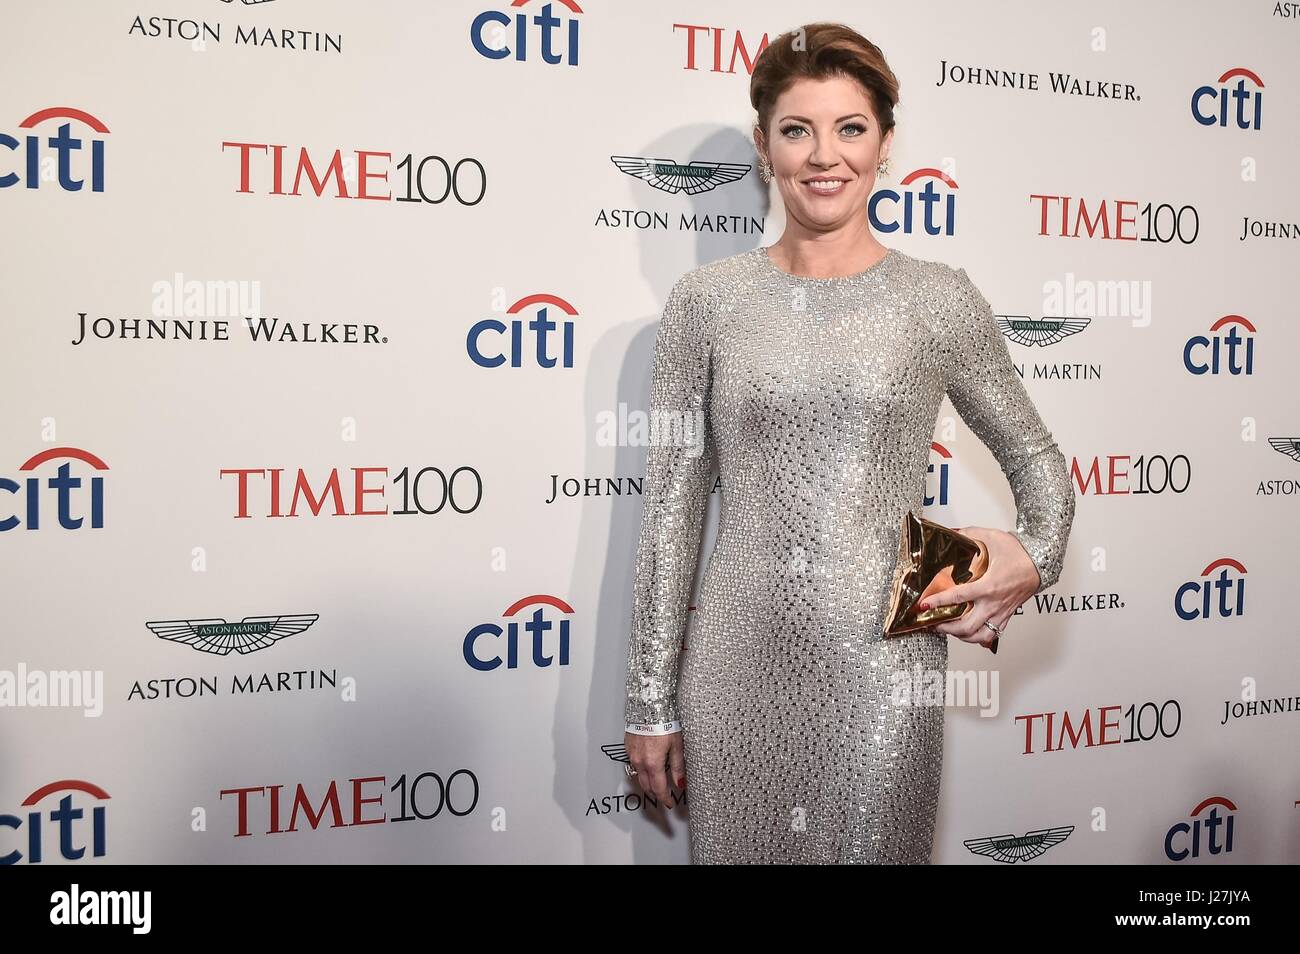 New York, NY, USA. 25th Apr, 2017. Norah O'Donnell at arrivals for TIME 100 Gala Dinner 2017, Jazz at Lincoln Center's Frederick P. Rose Hall, New York, NY April 25, 2017. Credit: Steven Ferdman/Everett Collection/Alamy Live News Stock Photo